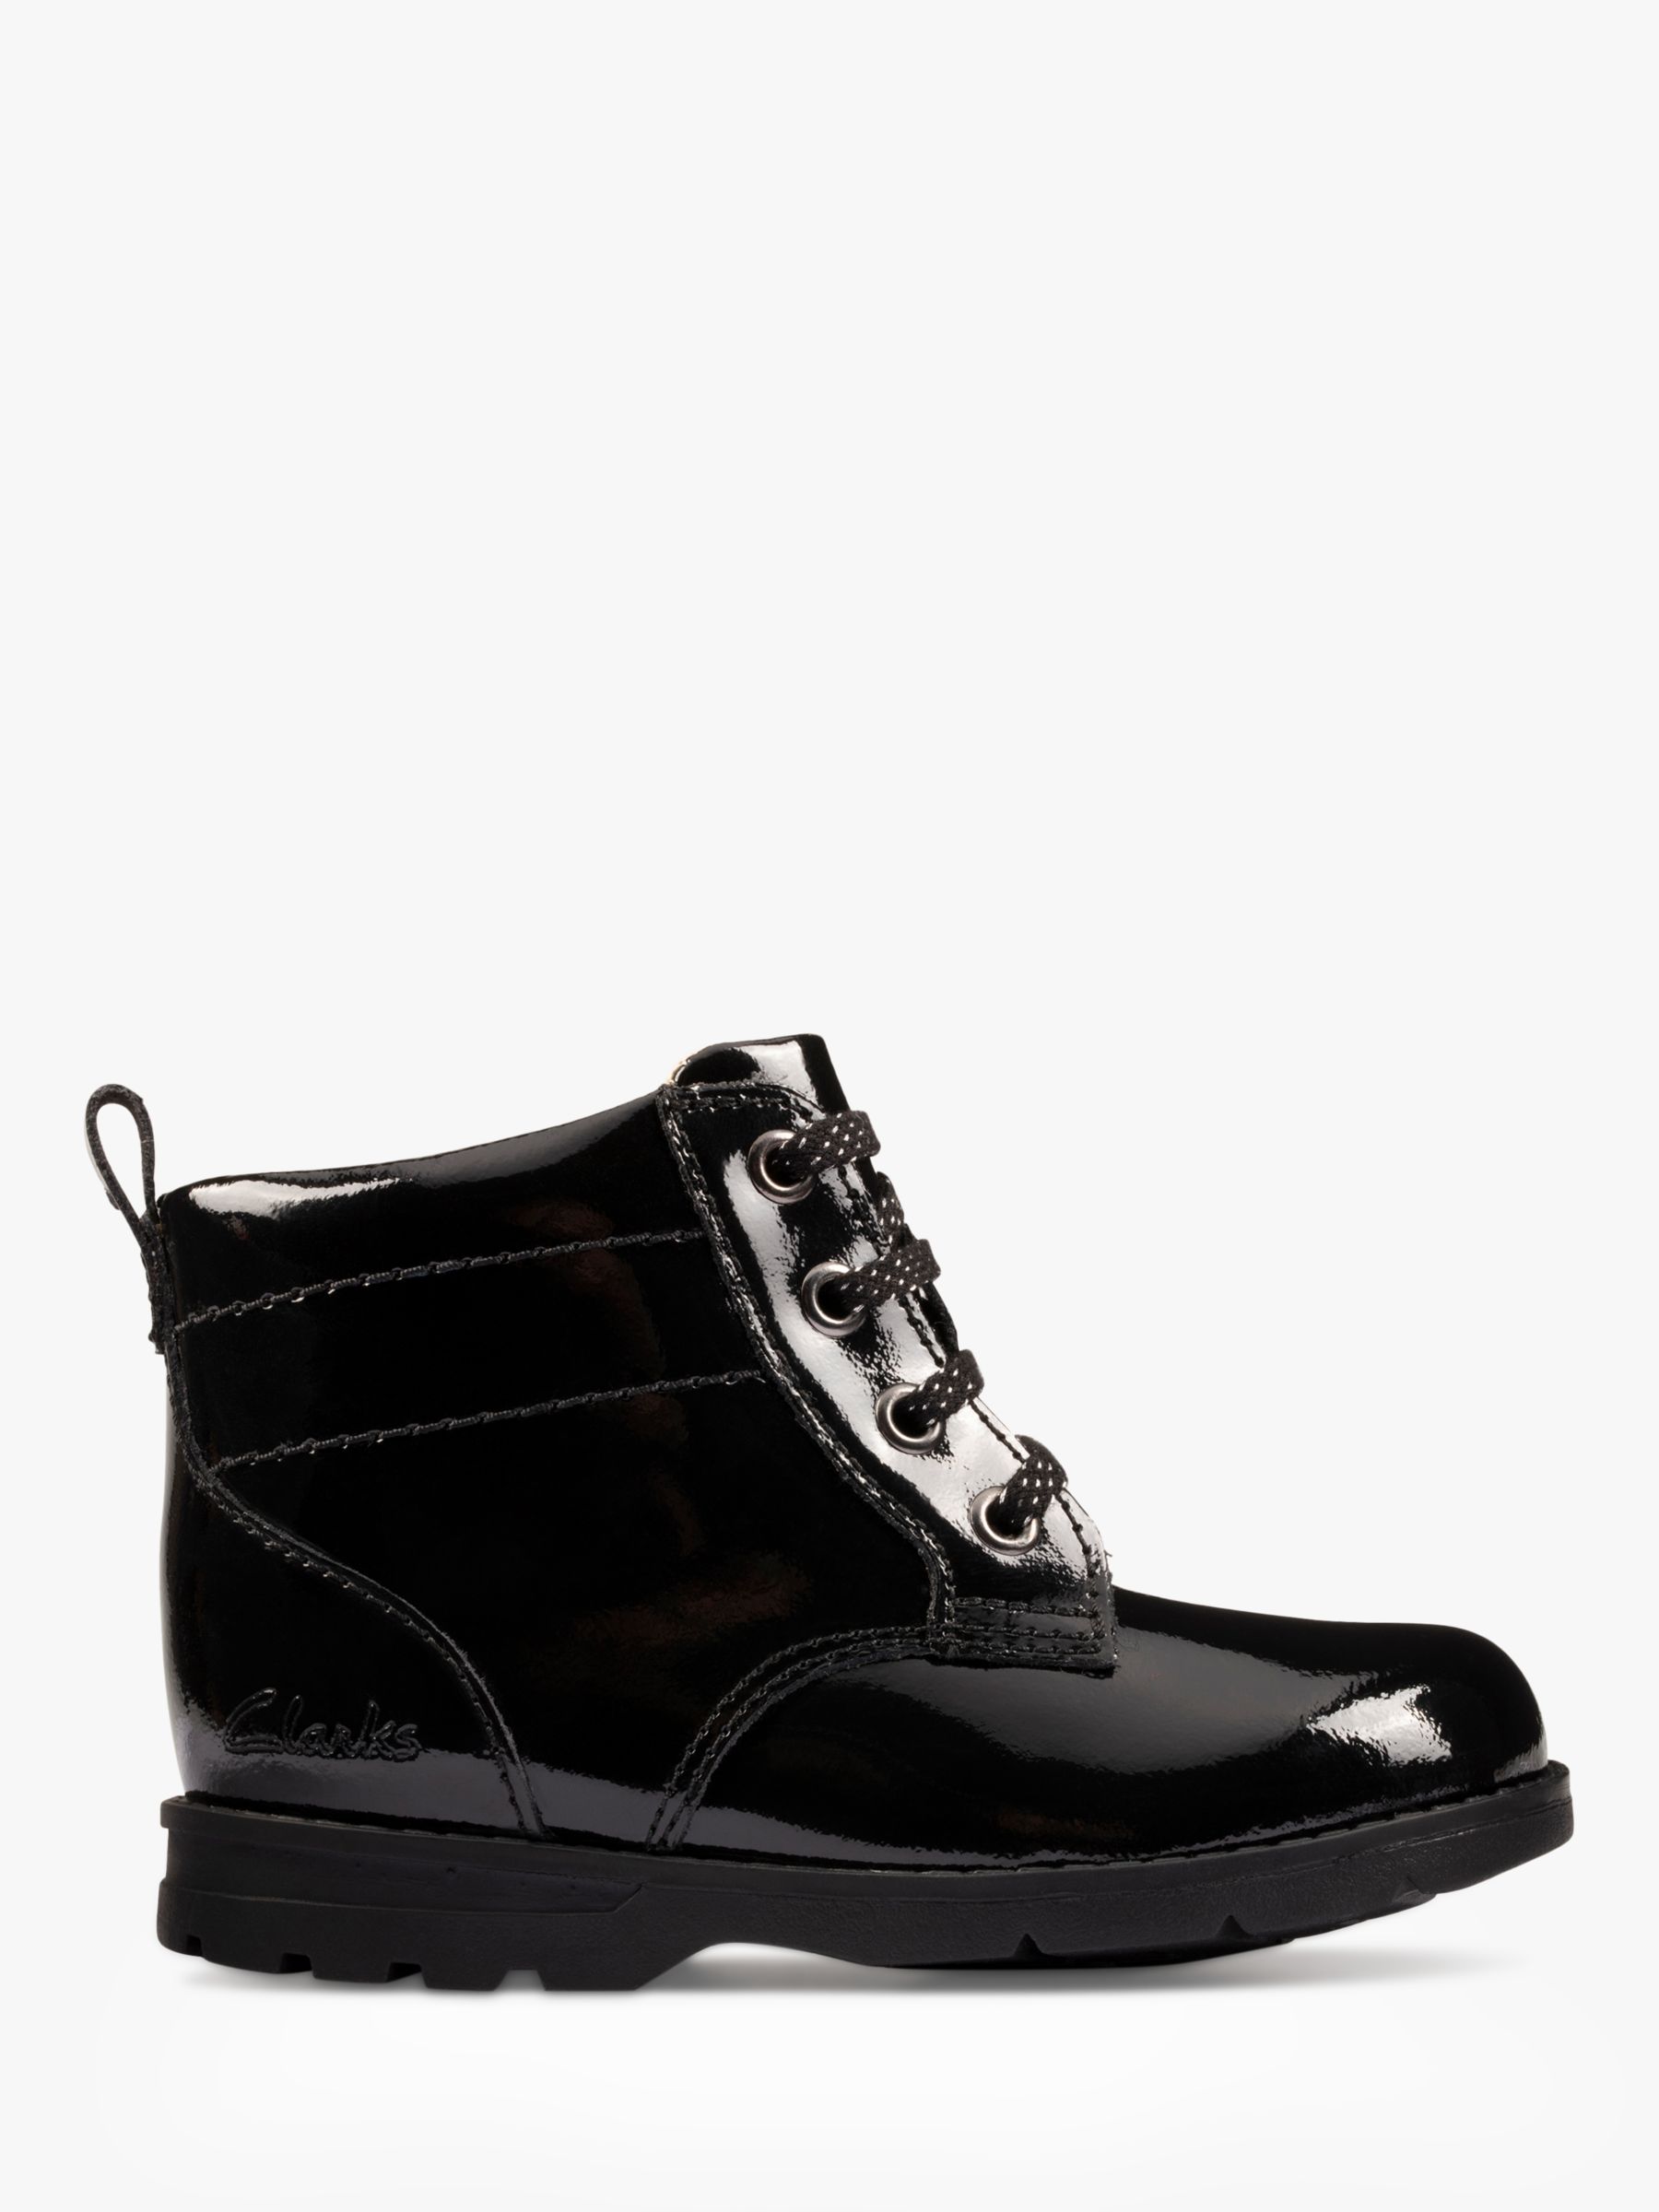 Clarks Children's Astro Lace Boots, Black Patent at John Lewis & Partners